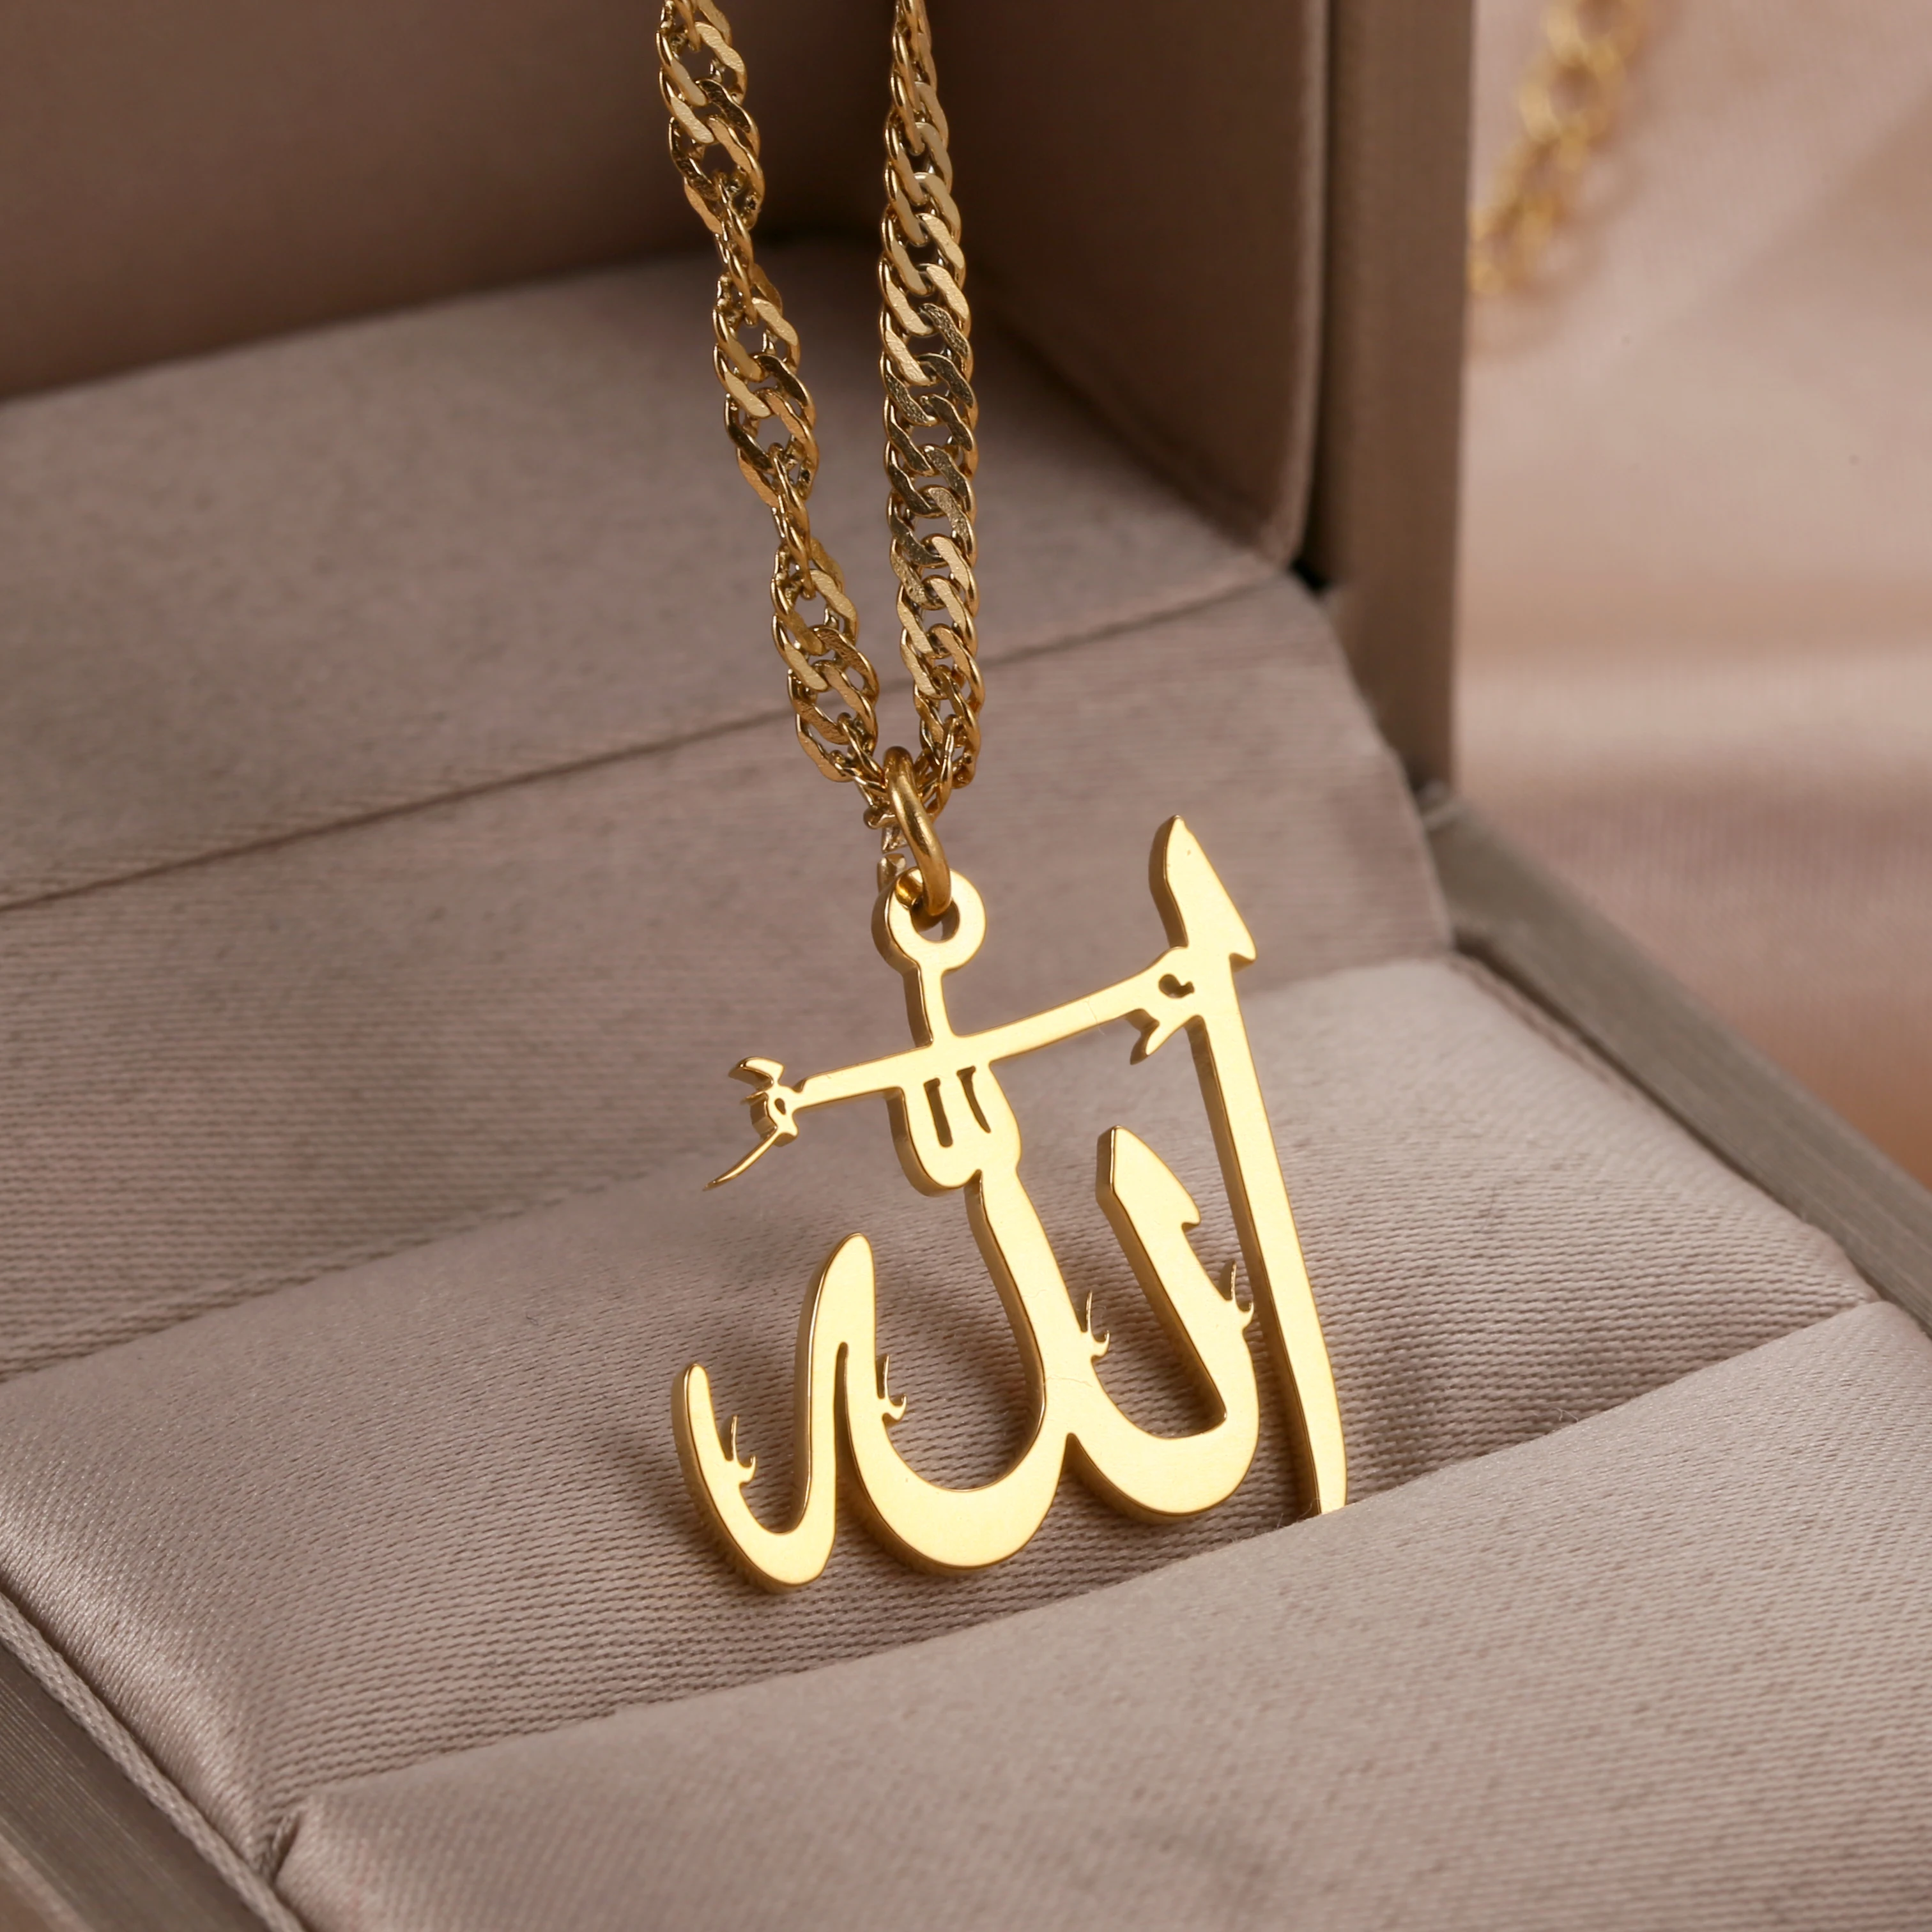 ALLAH PENDANT NECKLACE | WOMEN Custom Stainless Steel  Necklaces Gold Jewelry Pendants Islam Muslim Arabic God Messager Gifts